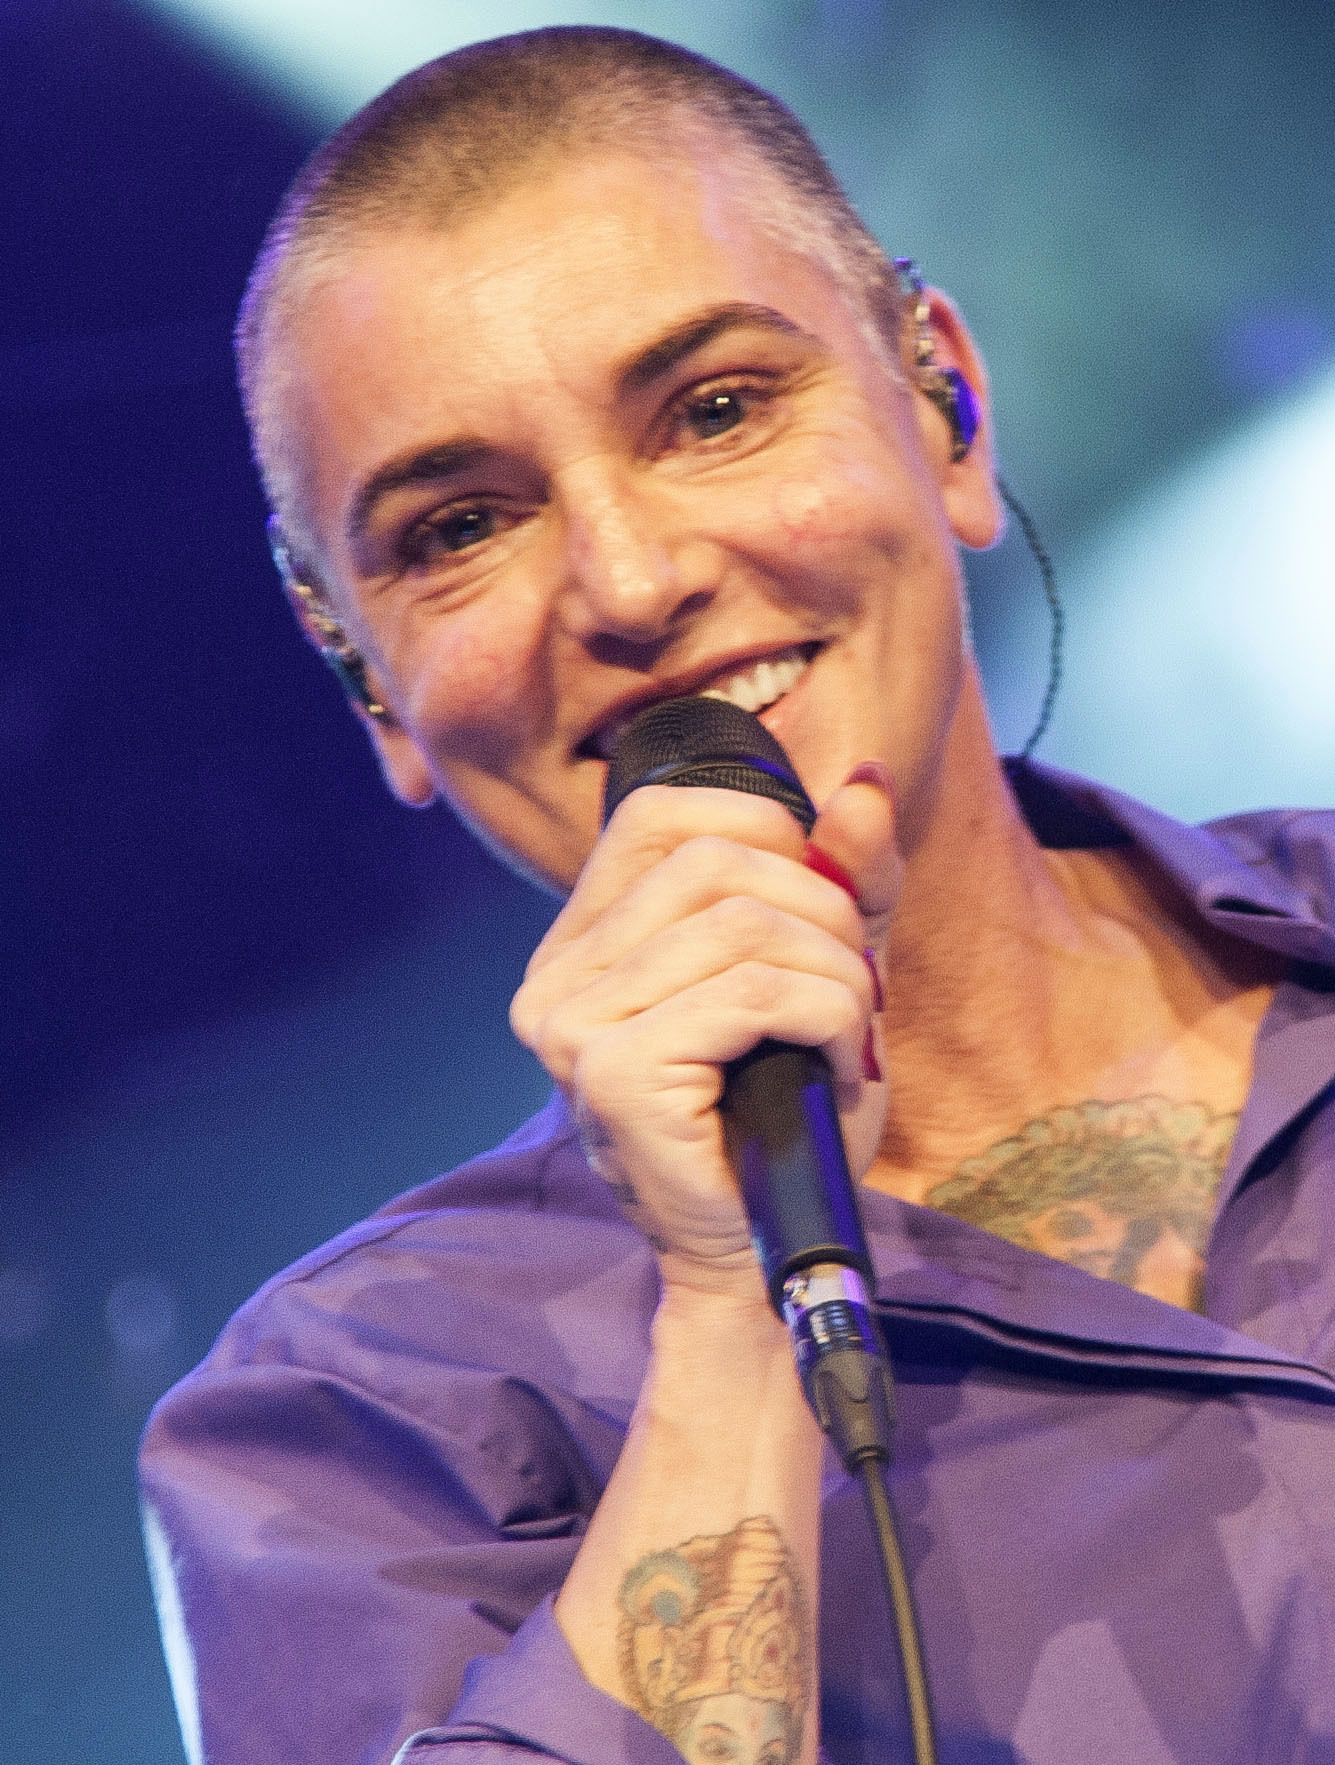 Sinead O'Connor singing a song at concert